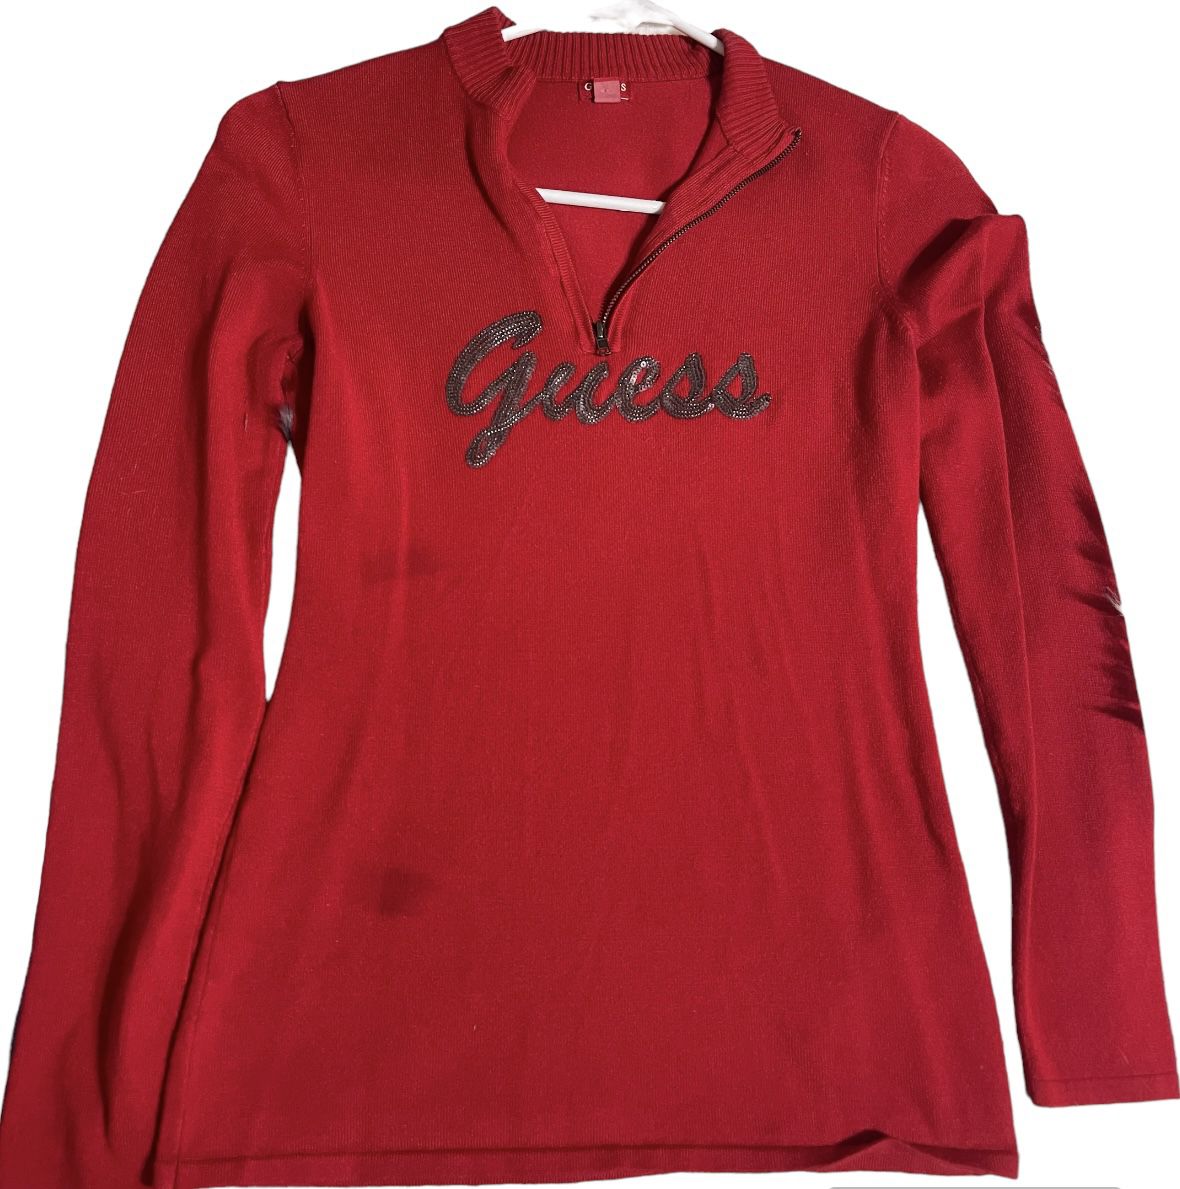 Guess Red Sweatshirt Blouse